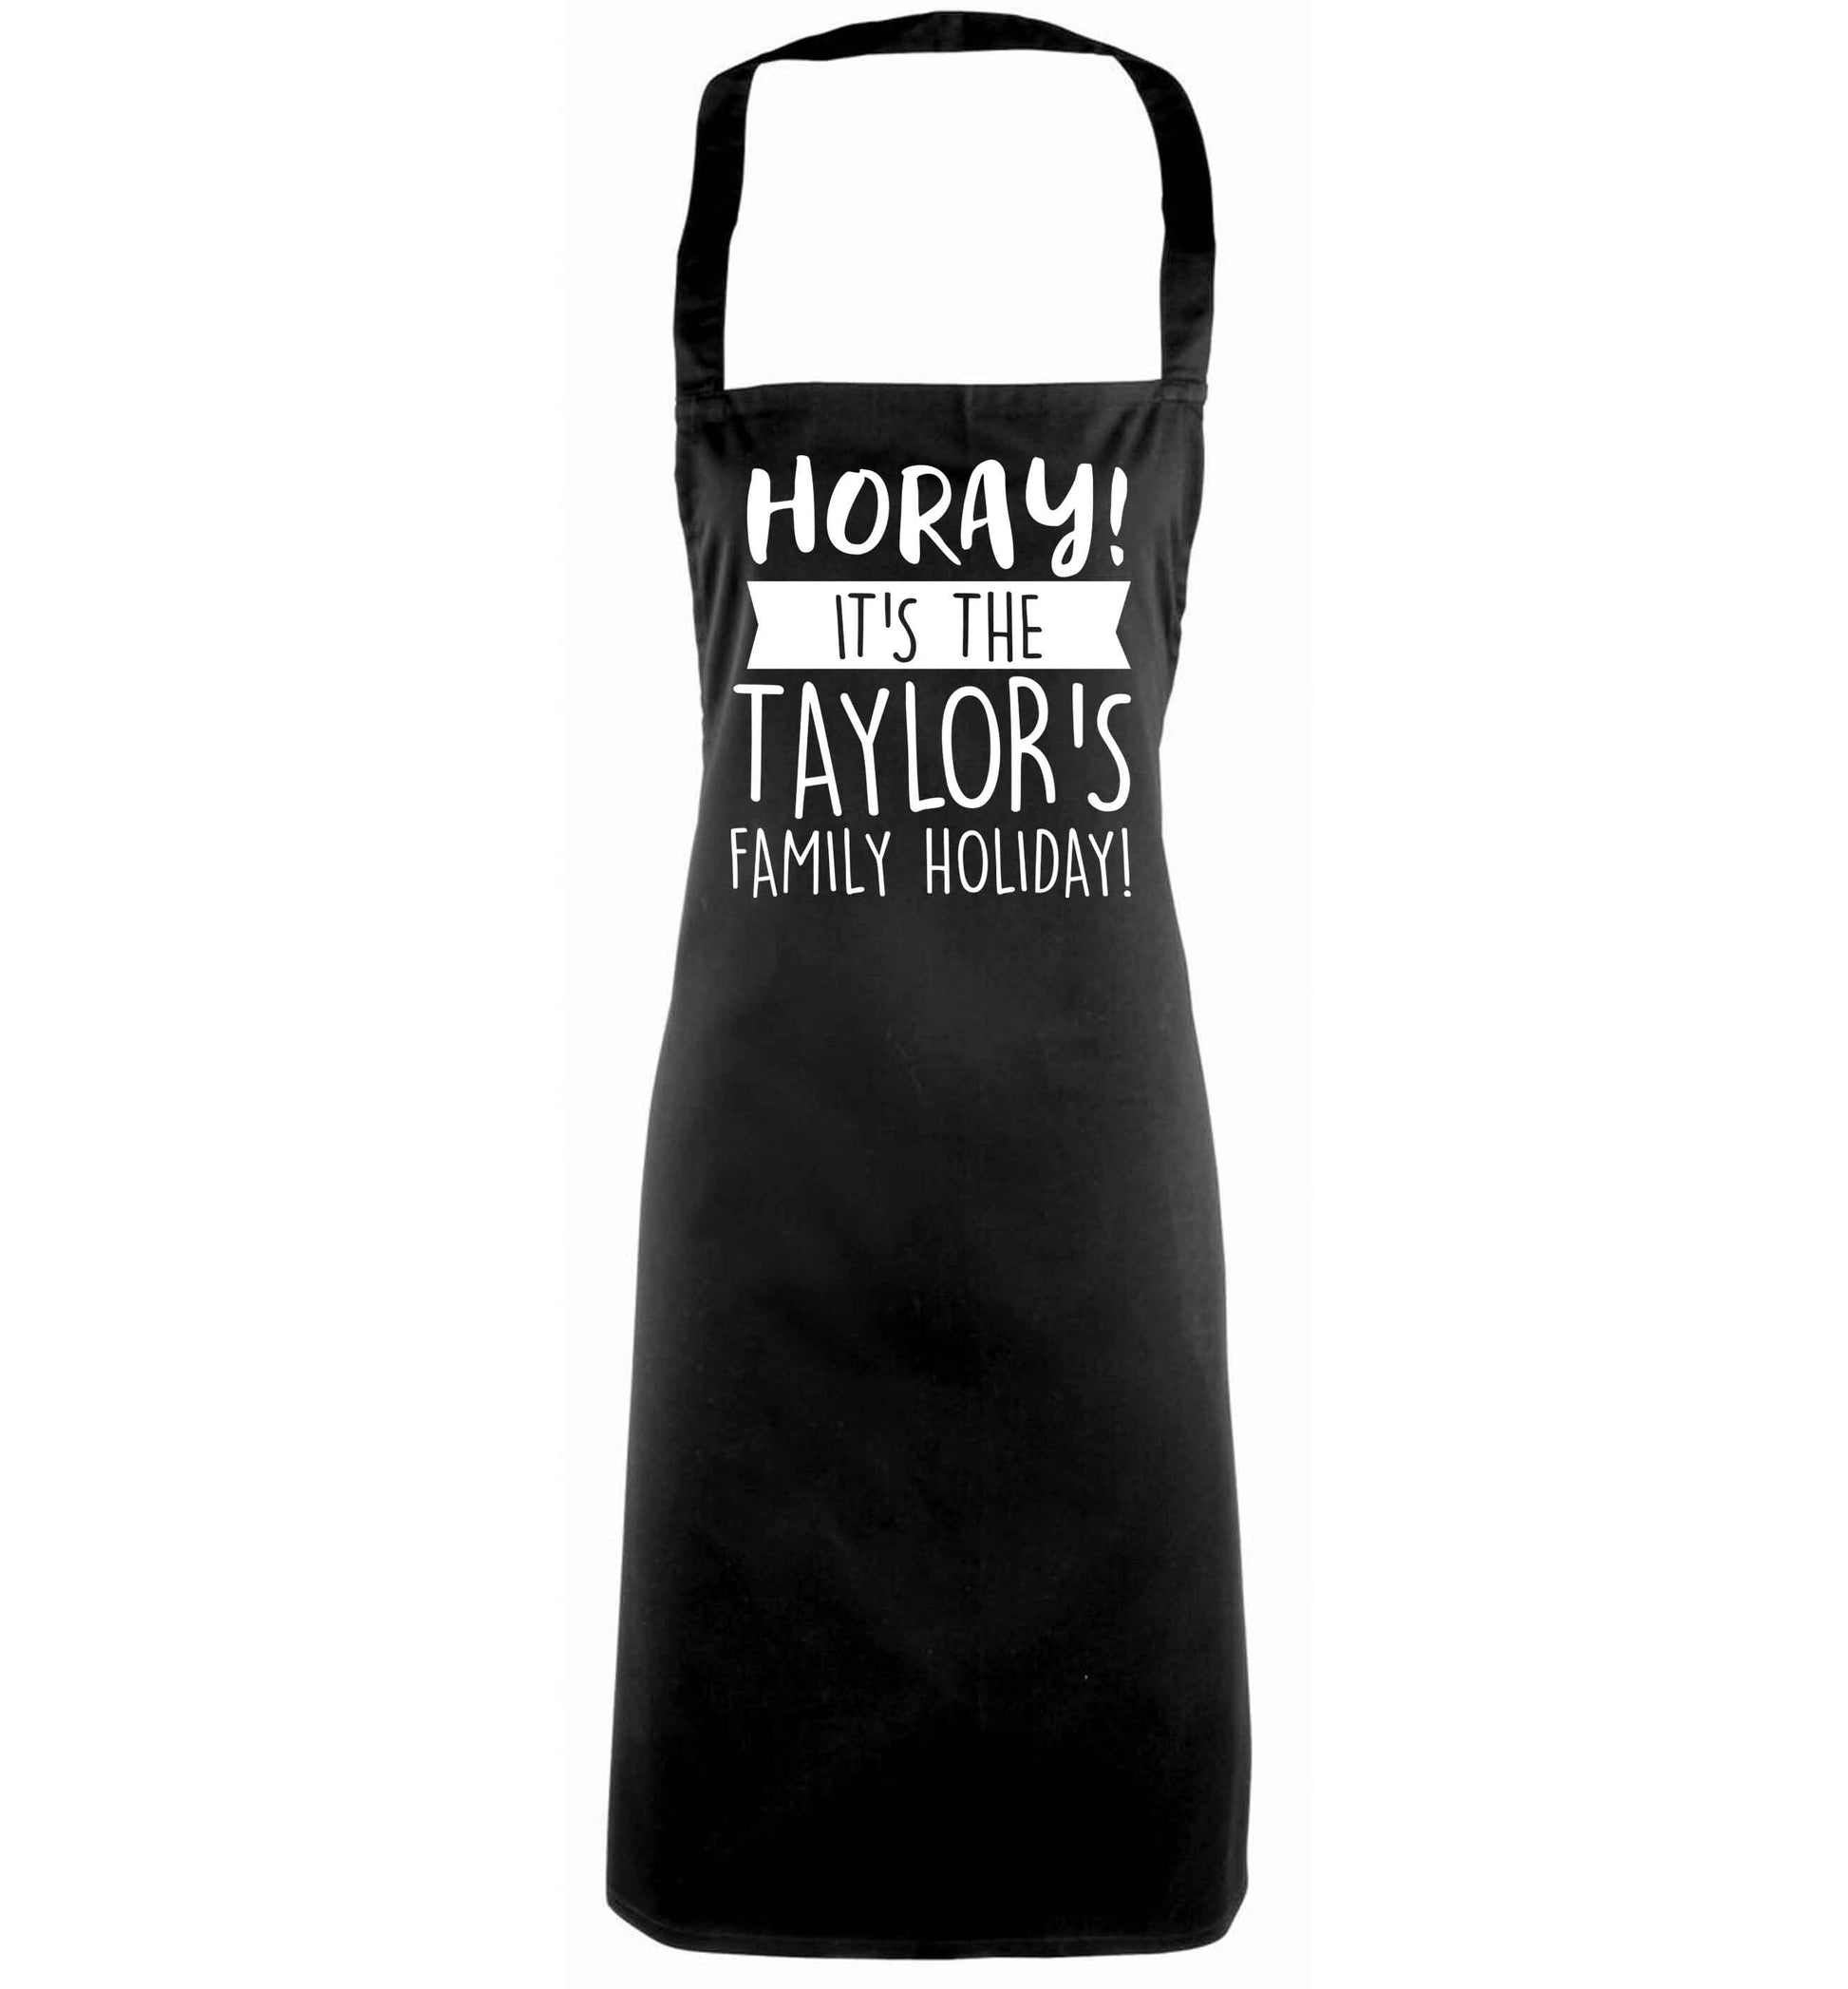 Horay it's the Taylor's family holiday! personalised item black apron